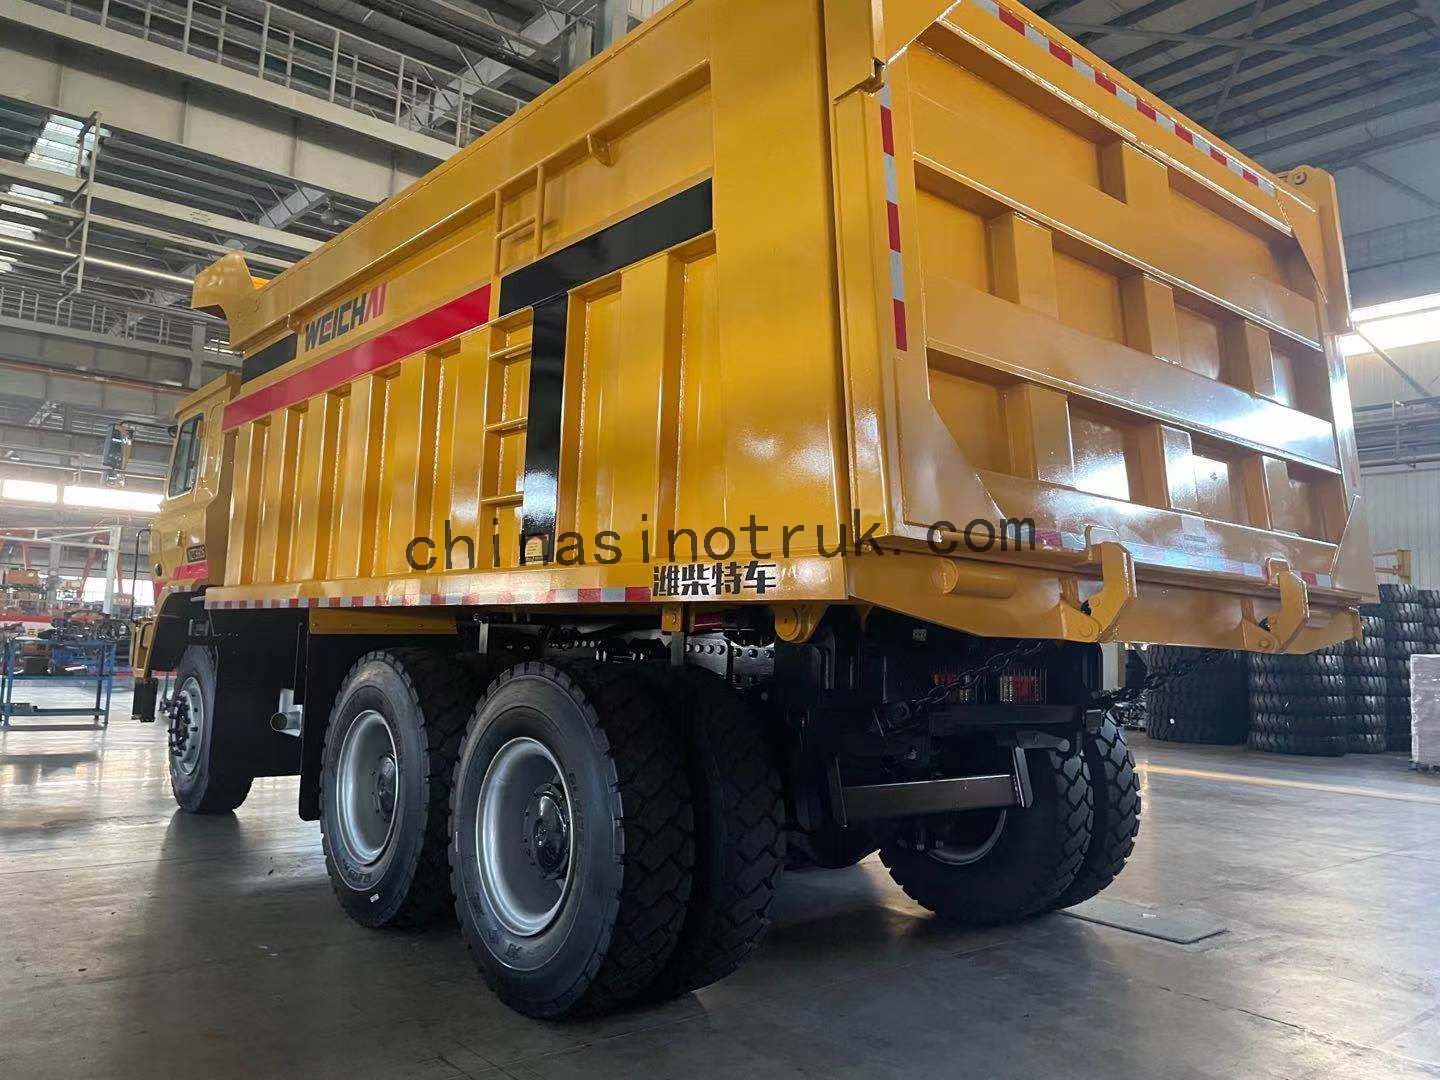 CHINA SINOTRUK INTERNATIONAL CO., LTD. is a high-quality choice for Mining Truck